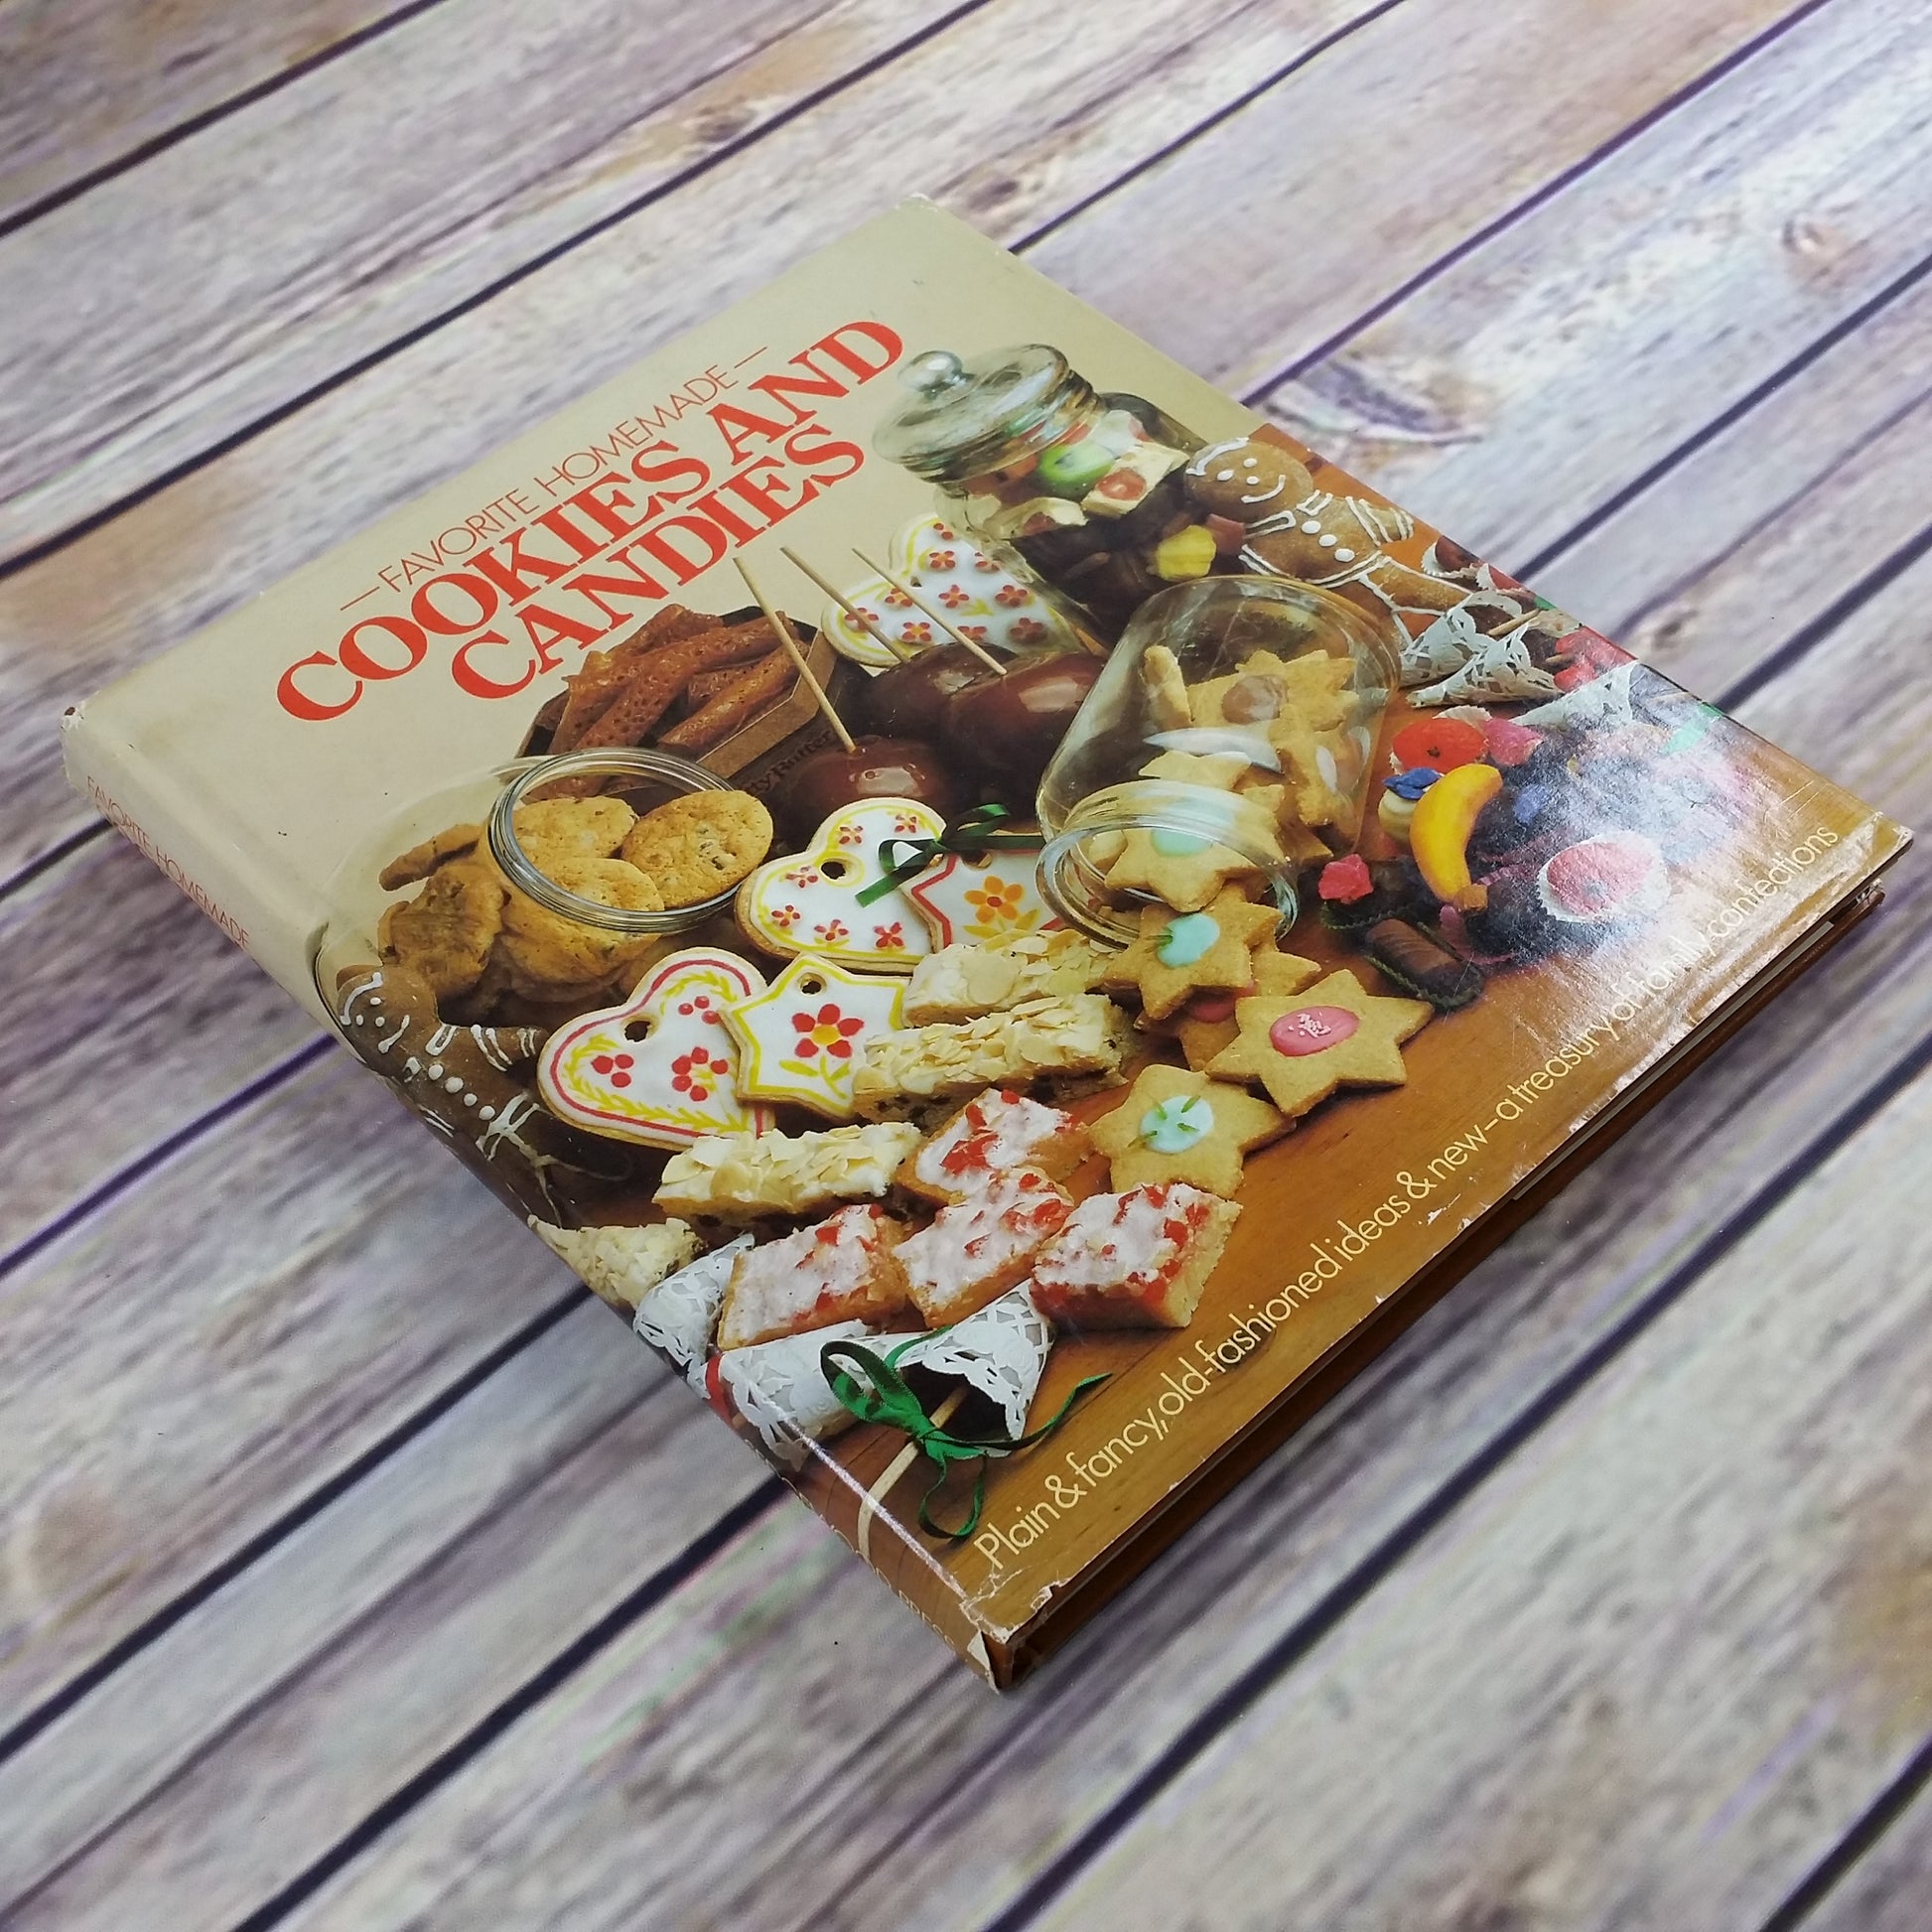 Vintage Cookbook Favorite Homemade Cookies and Candies Recipes 1982 Hardcover - At Grandma's Table